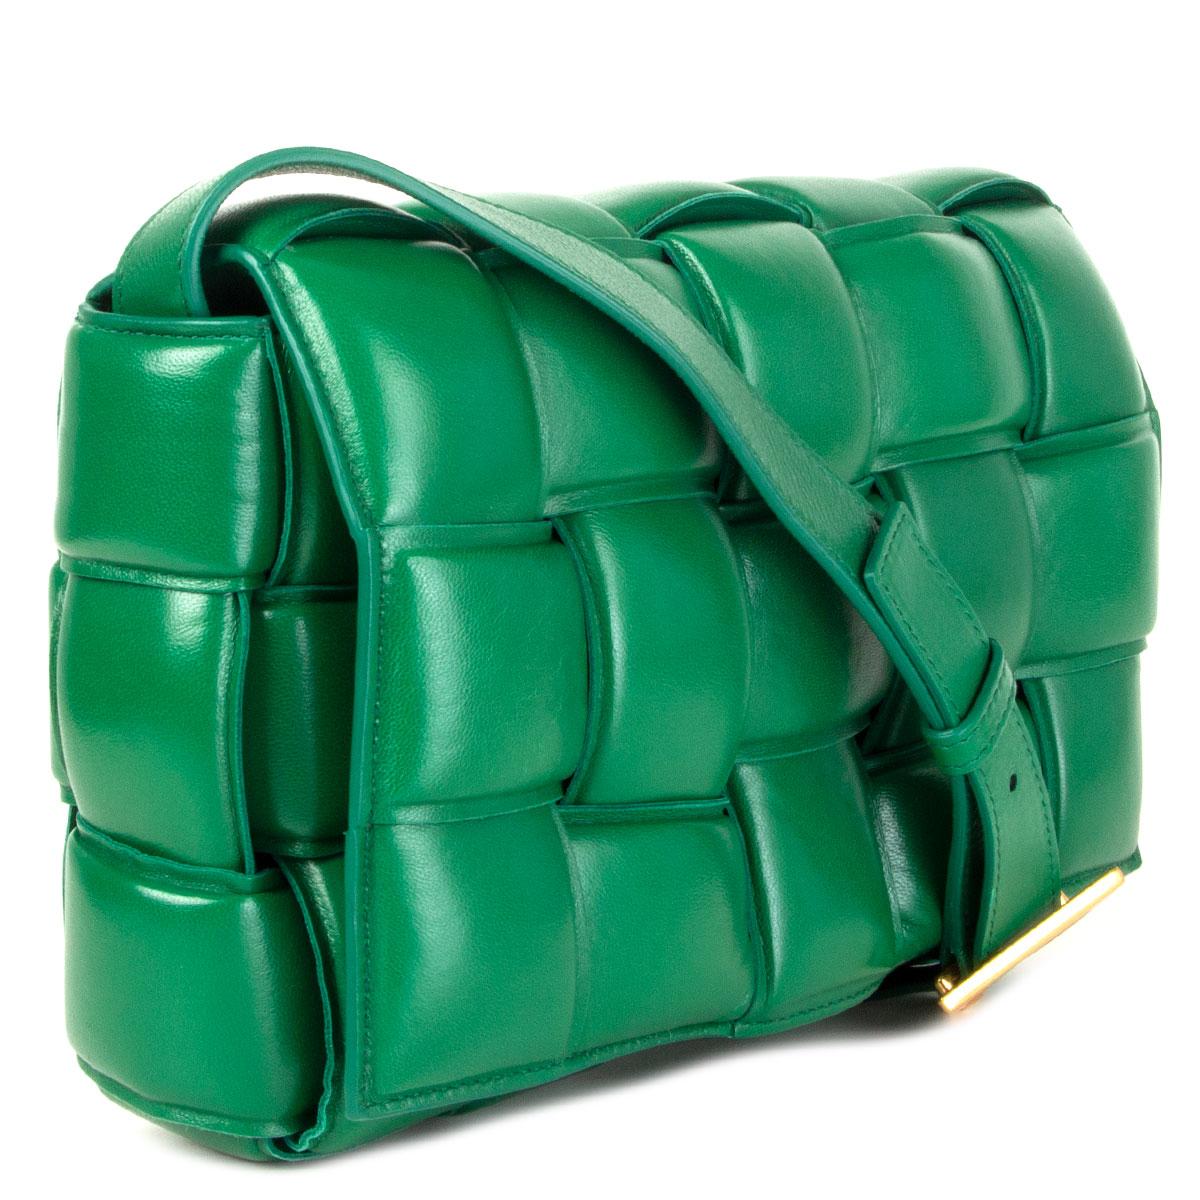 Bottega Veneta Cassette shoulder bag in padded smooth racing green lambskin and gold-tone hardware. Unlined with one zipper pocket against the back. Has been carried and is in excellent condition. 

Height 20cm (7.8in)
Width 26cm (10.1in)
Depth 7cm